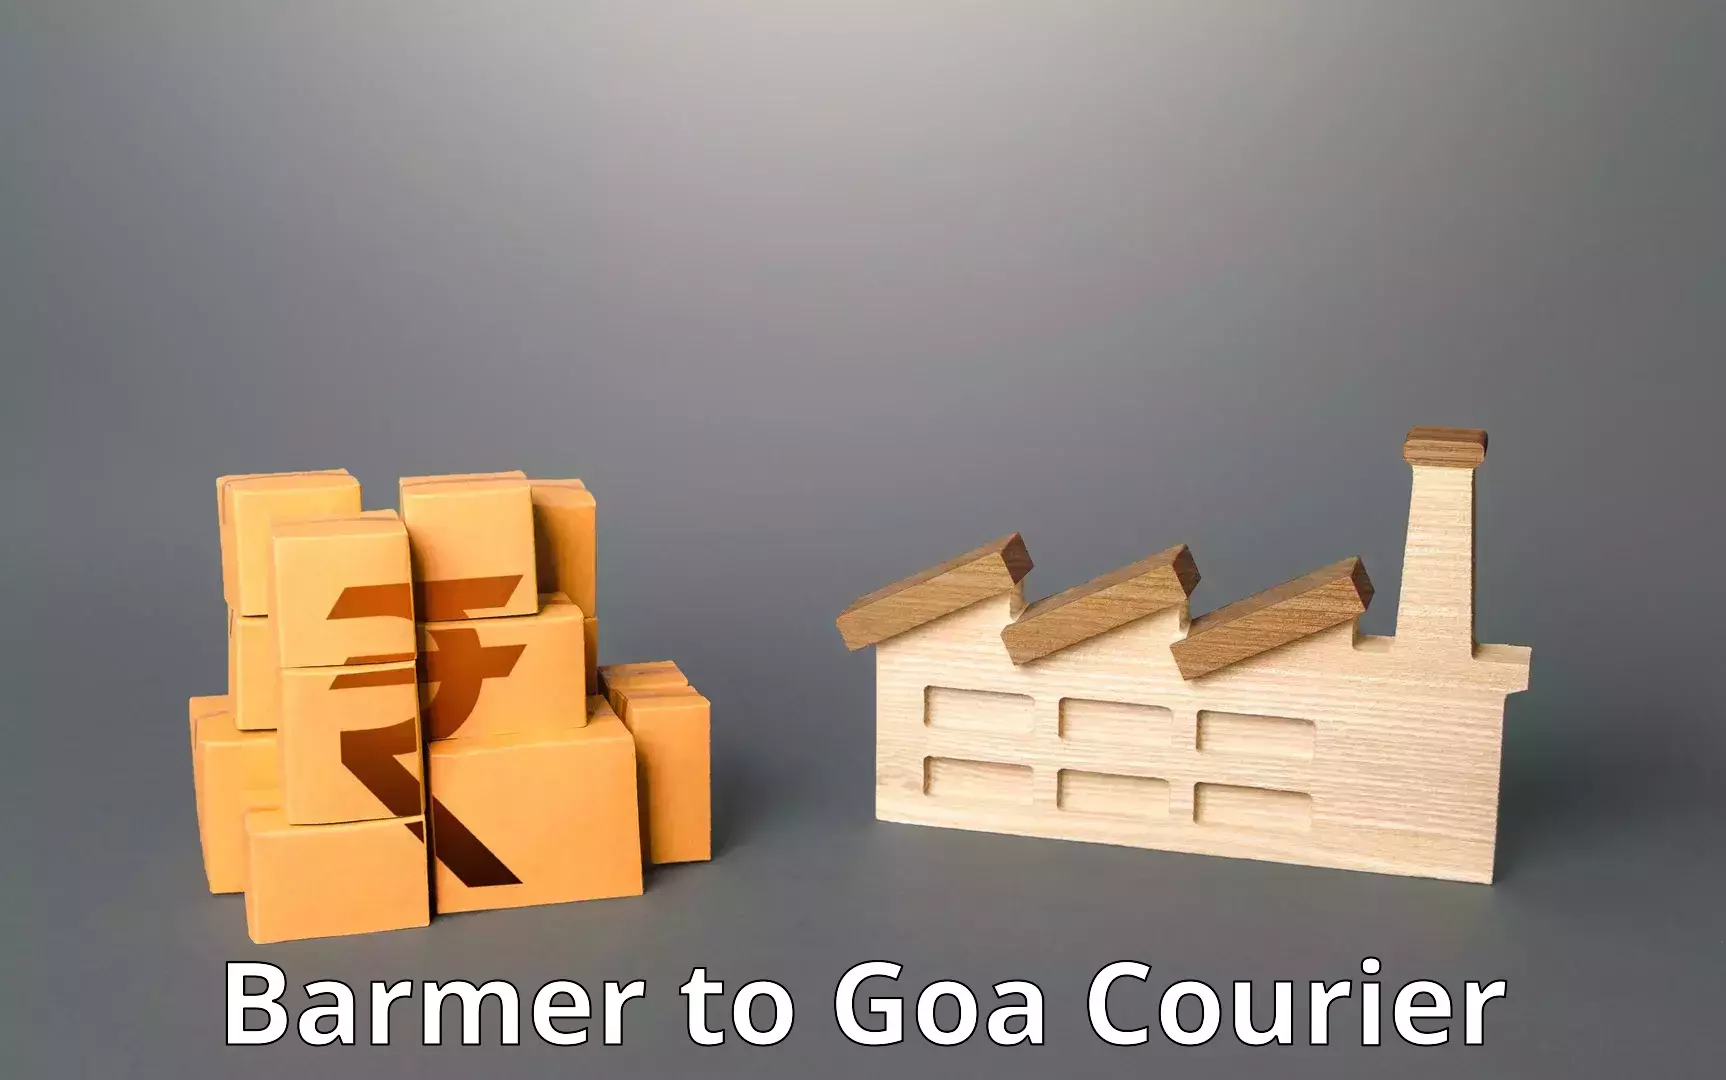 24-hour courier service Barmer to Goa